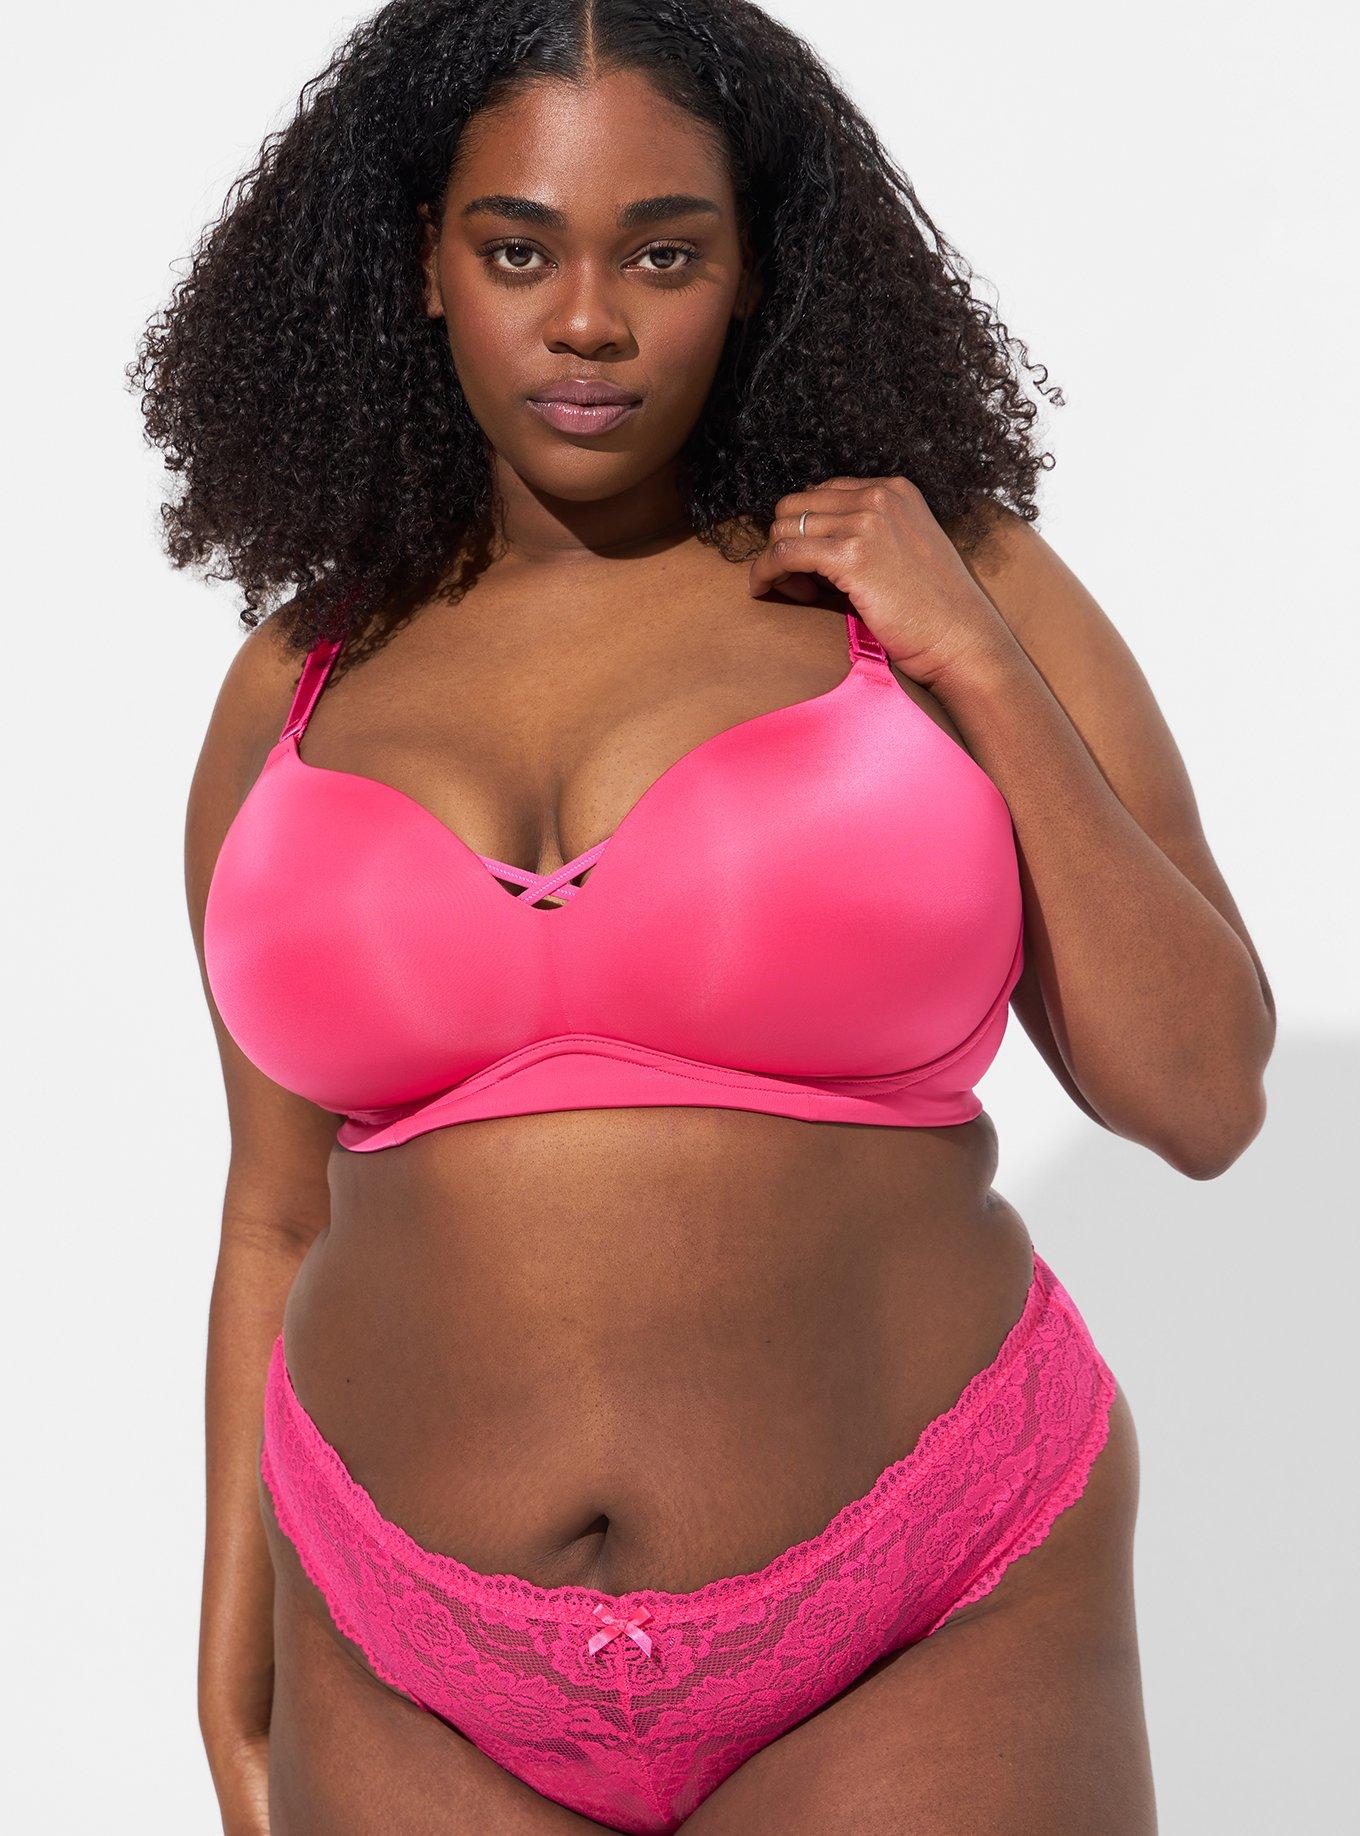 Torrid CURVE NWT! Dream Wire-Free Push-Up Bra in Cabaret size 42DD - $39  New With Tags - From Marisa